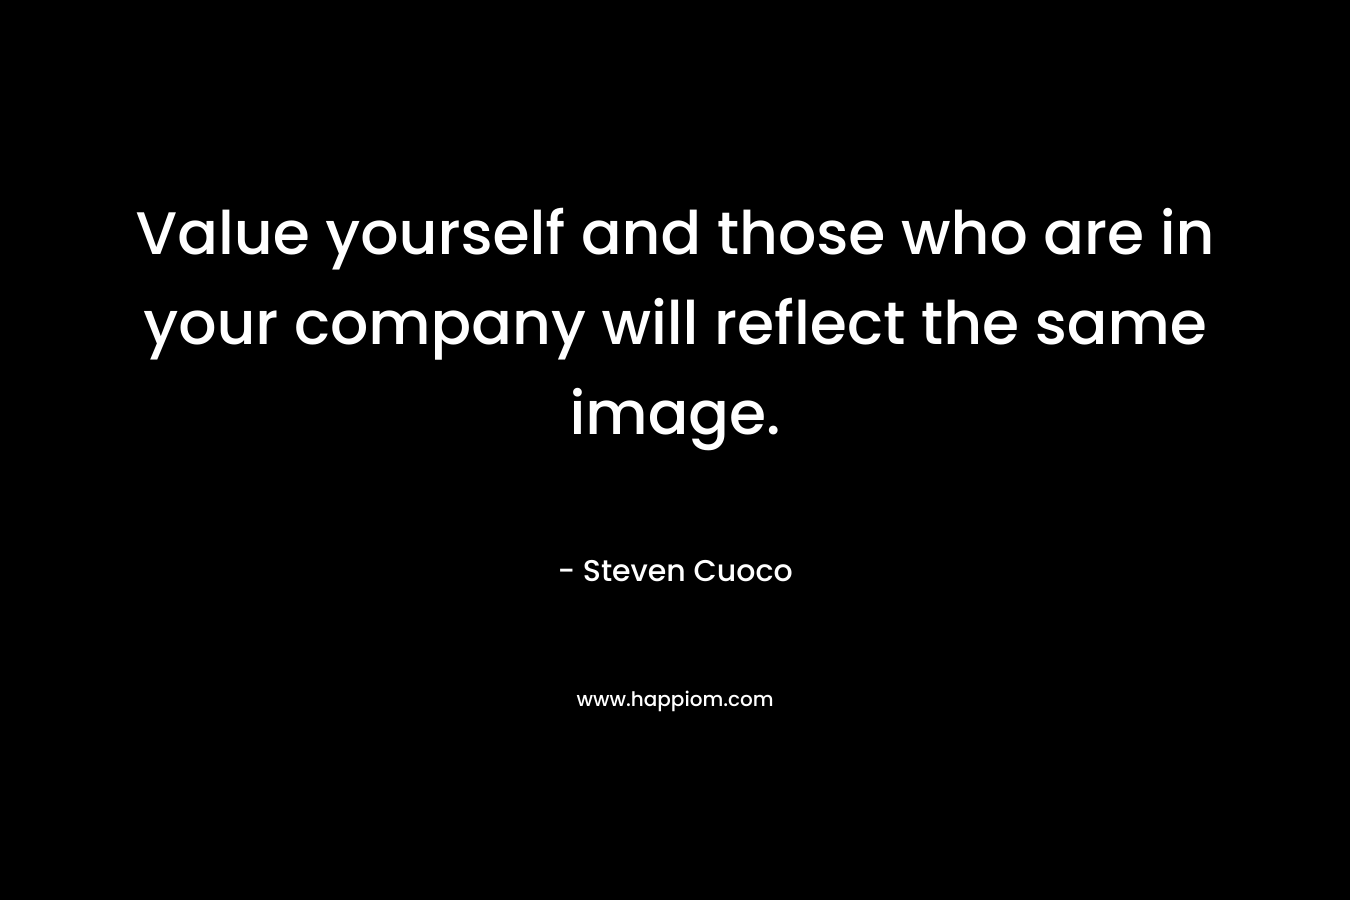 Value yourself and those who are in your company will reflect the same image.